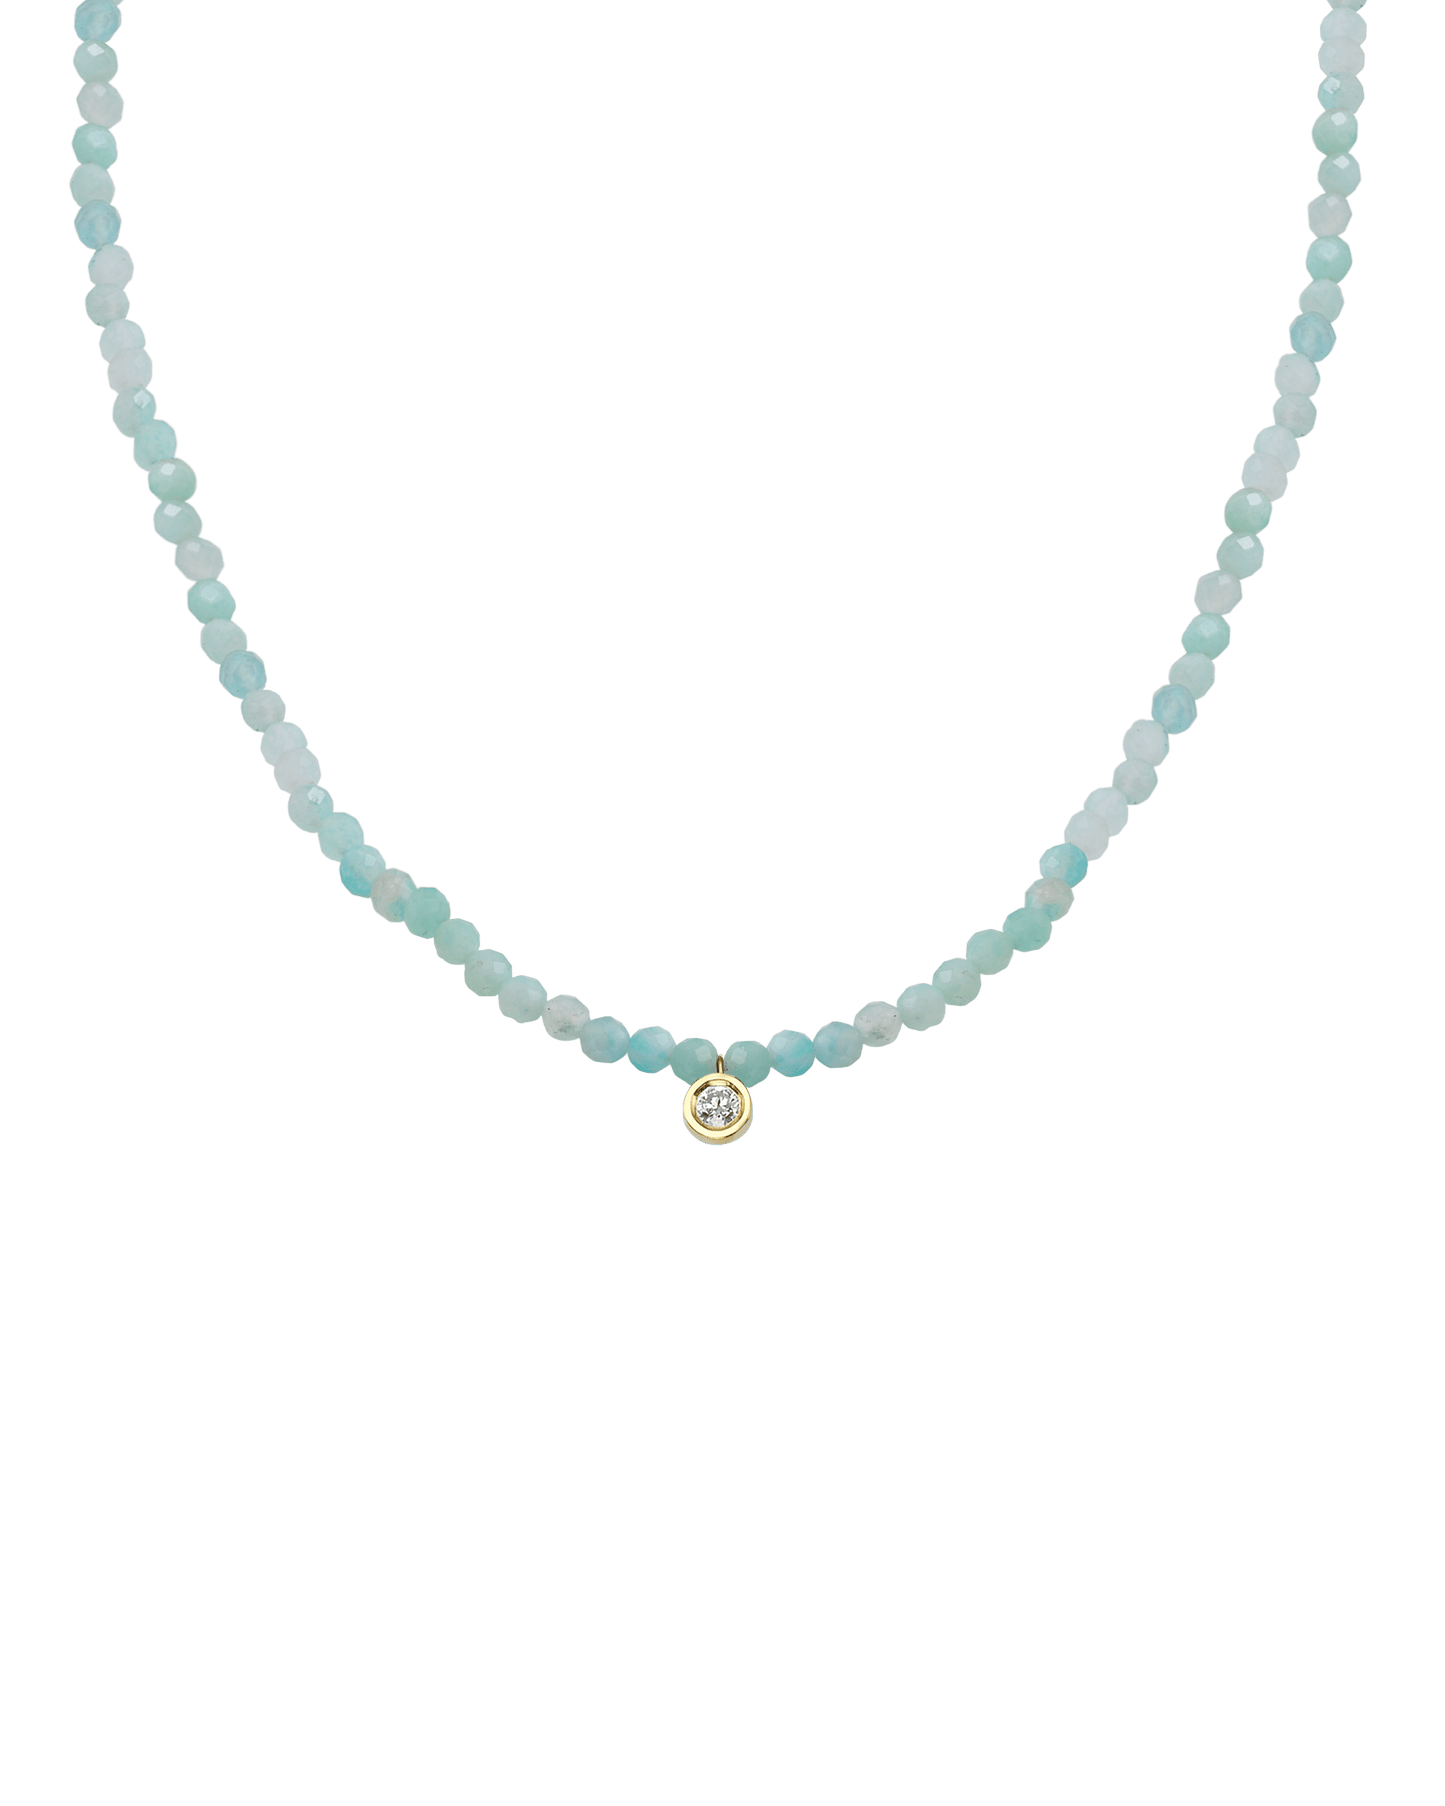 Apatite Gemstone & Diamond Necklace - 14K Yellow Gold Necklaces 14K Solid Gold Natural Apatite Medium: 0.05ct 14"